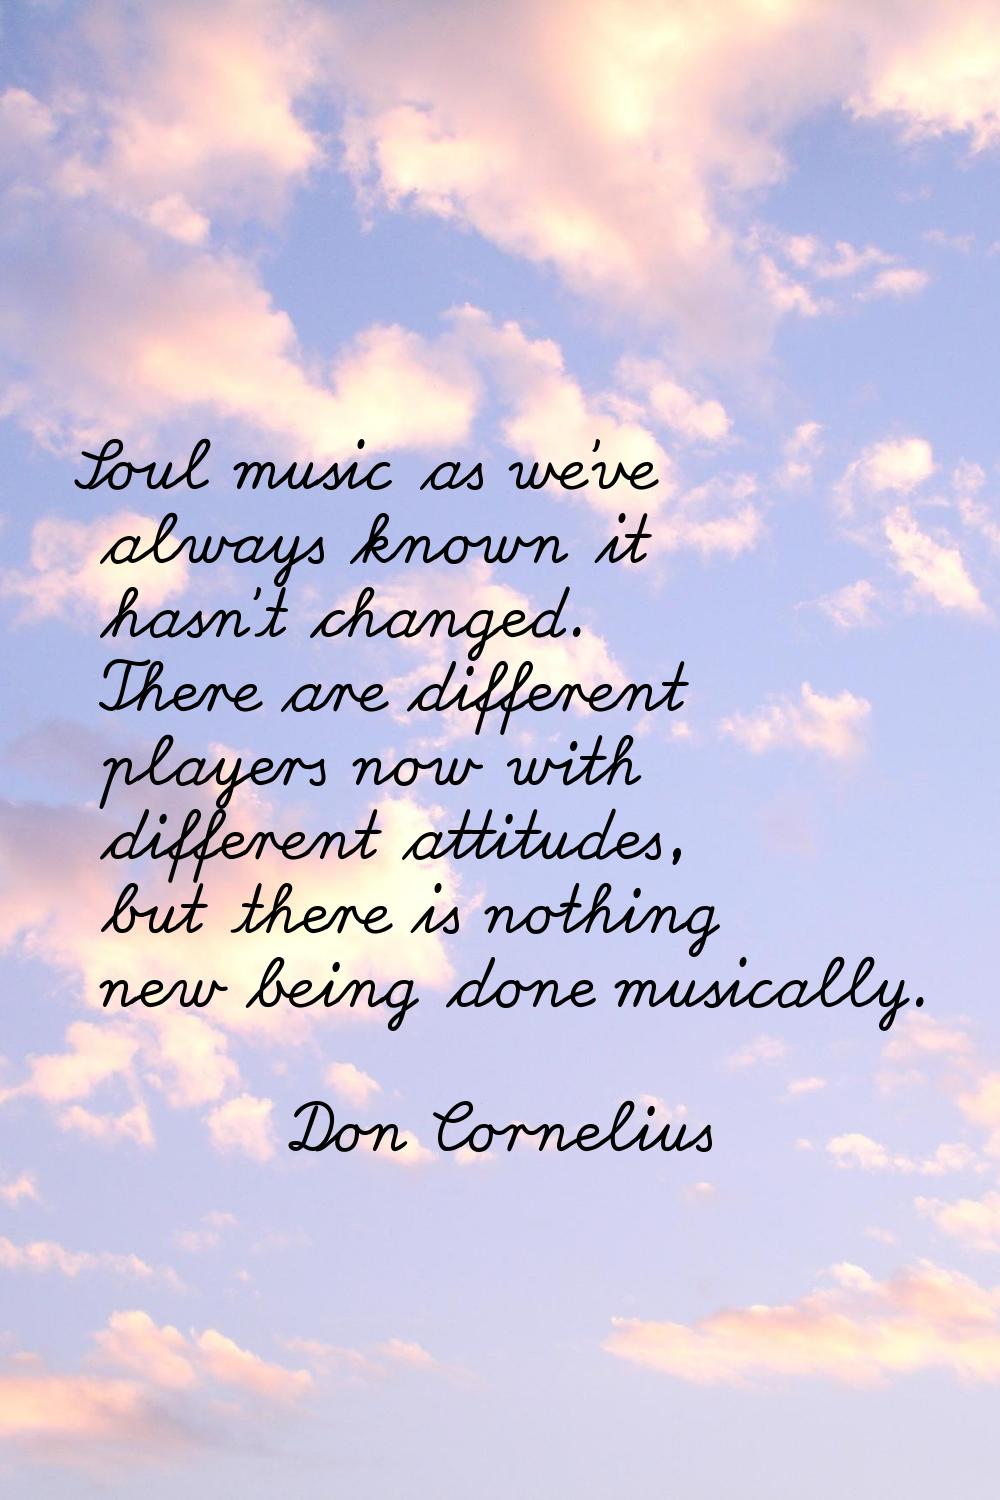 Soul music as we've always known it hasn't changed. There are different players now with different 